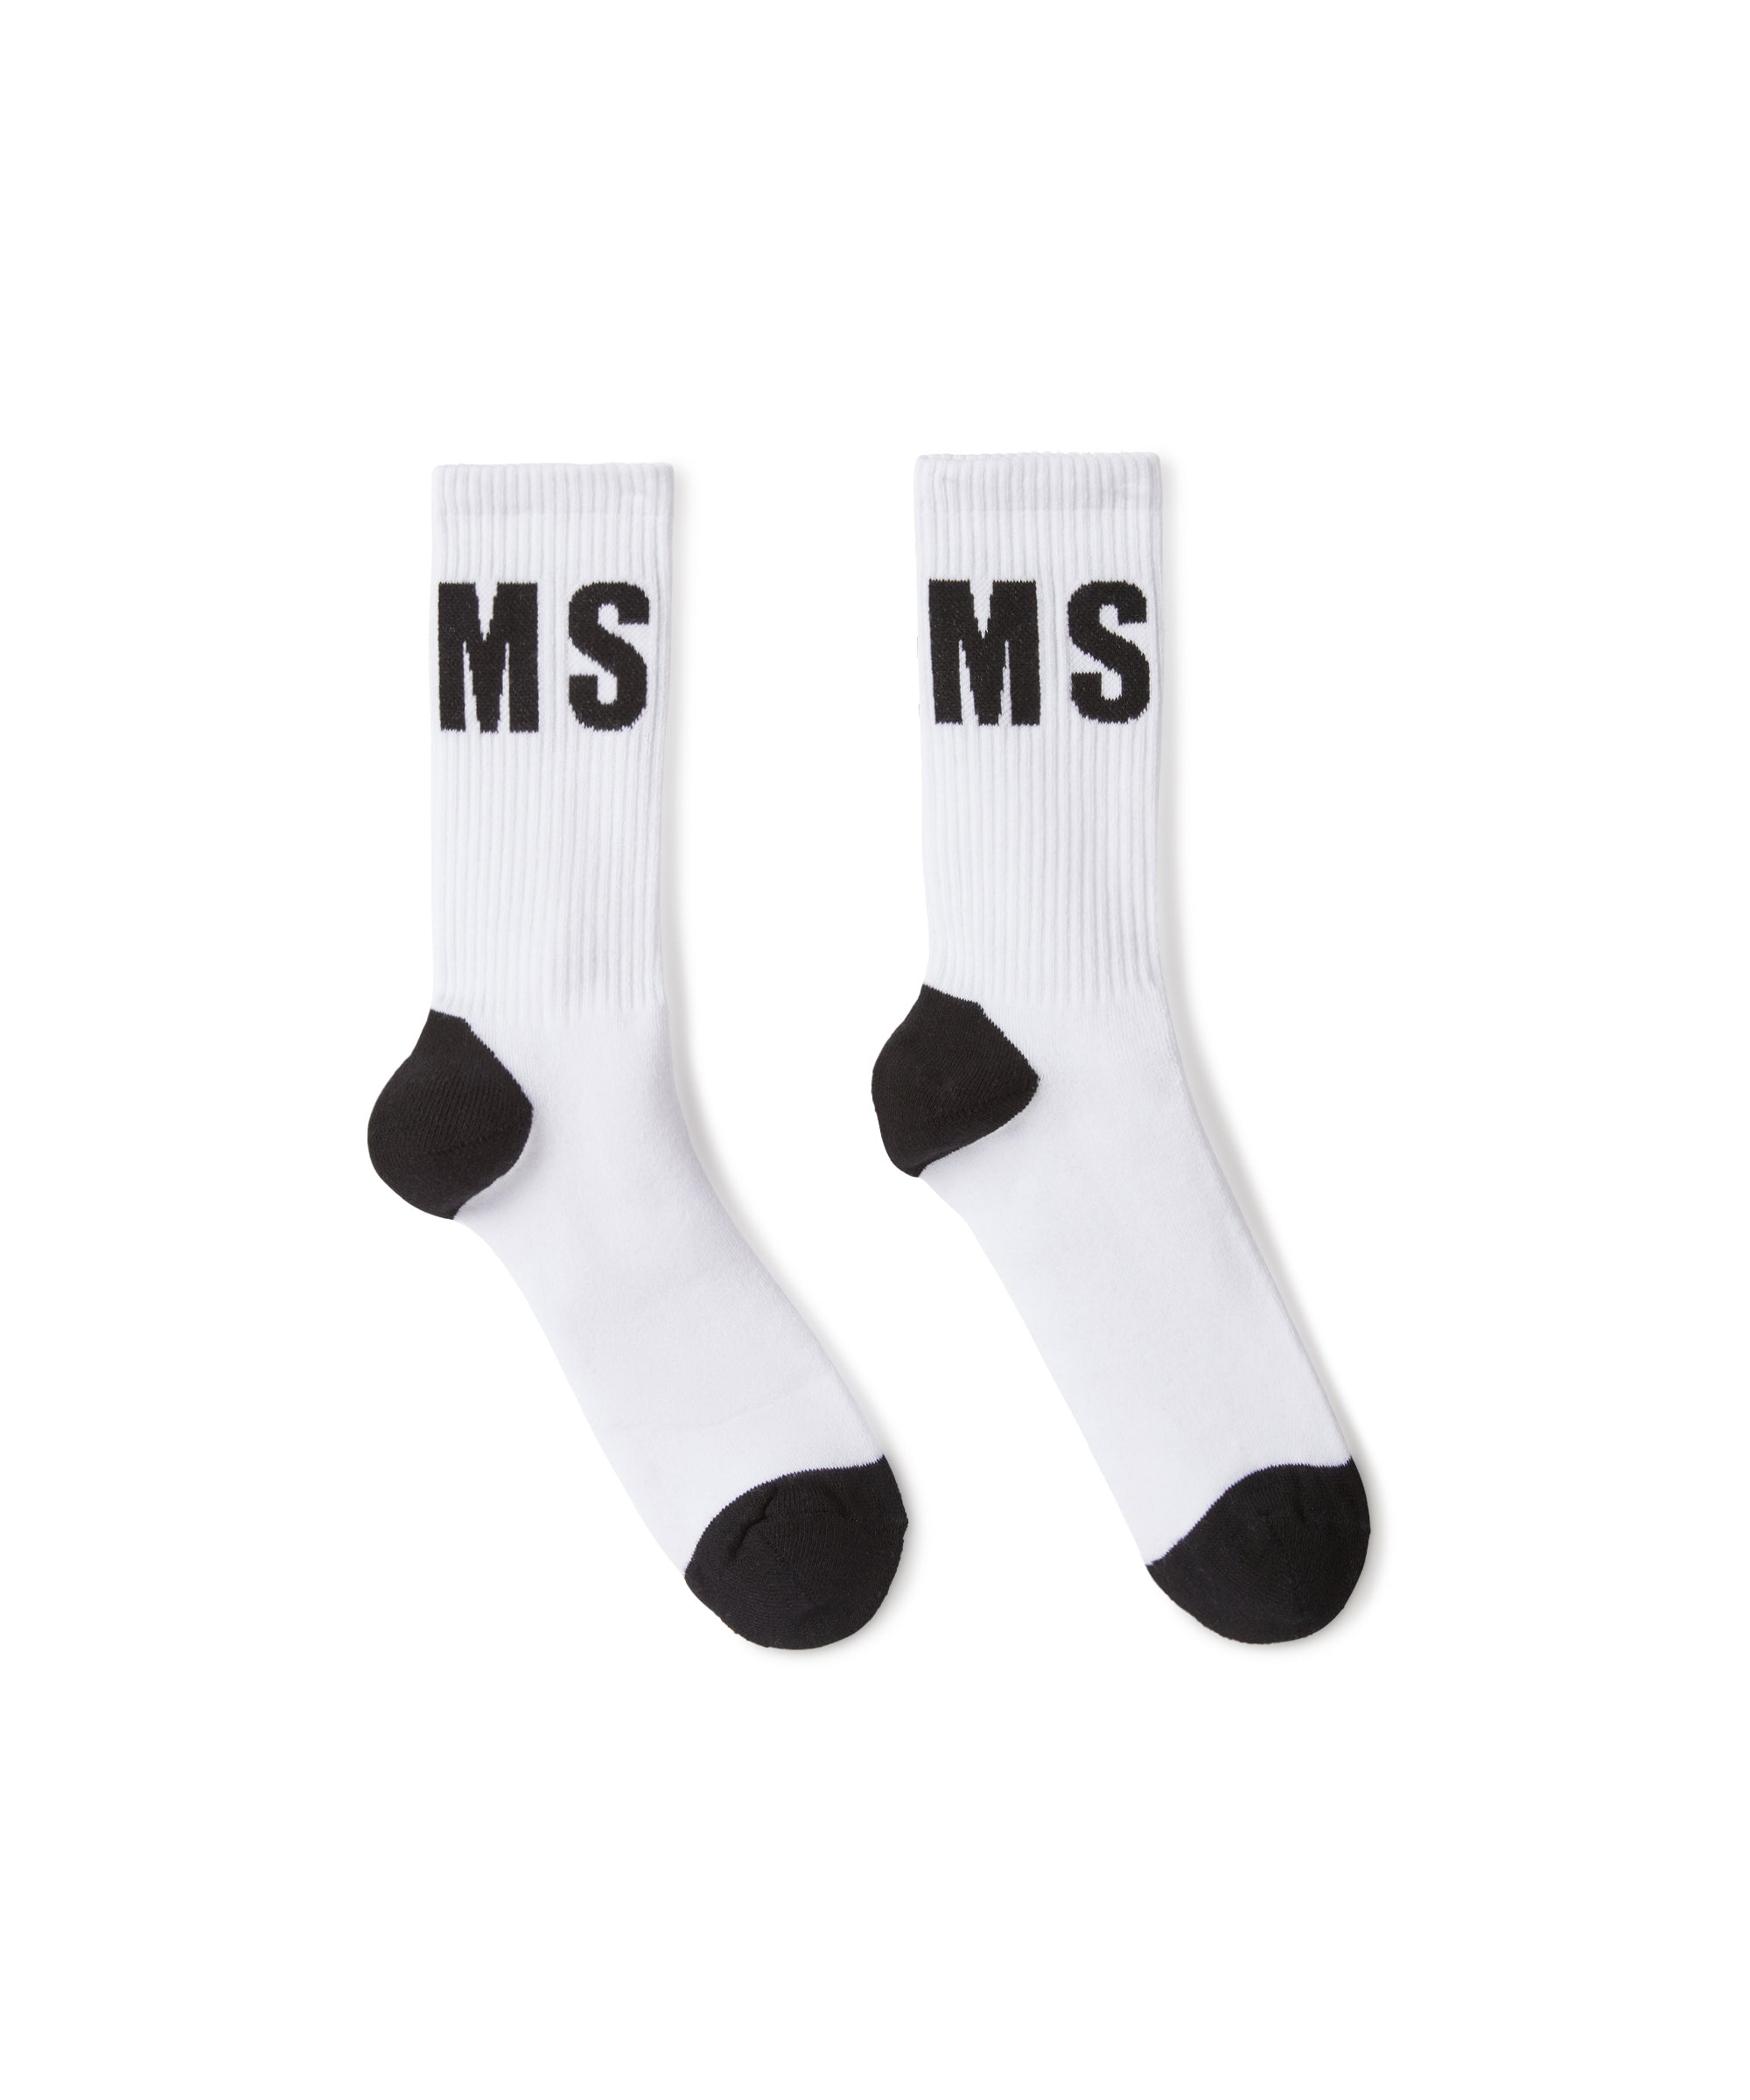 Solid color cotton socks with MSGM logo - 1